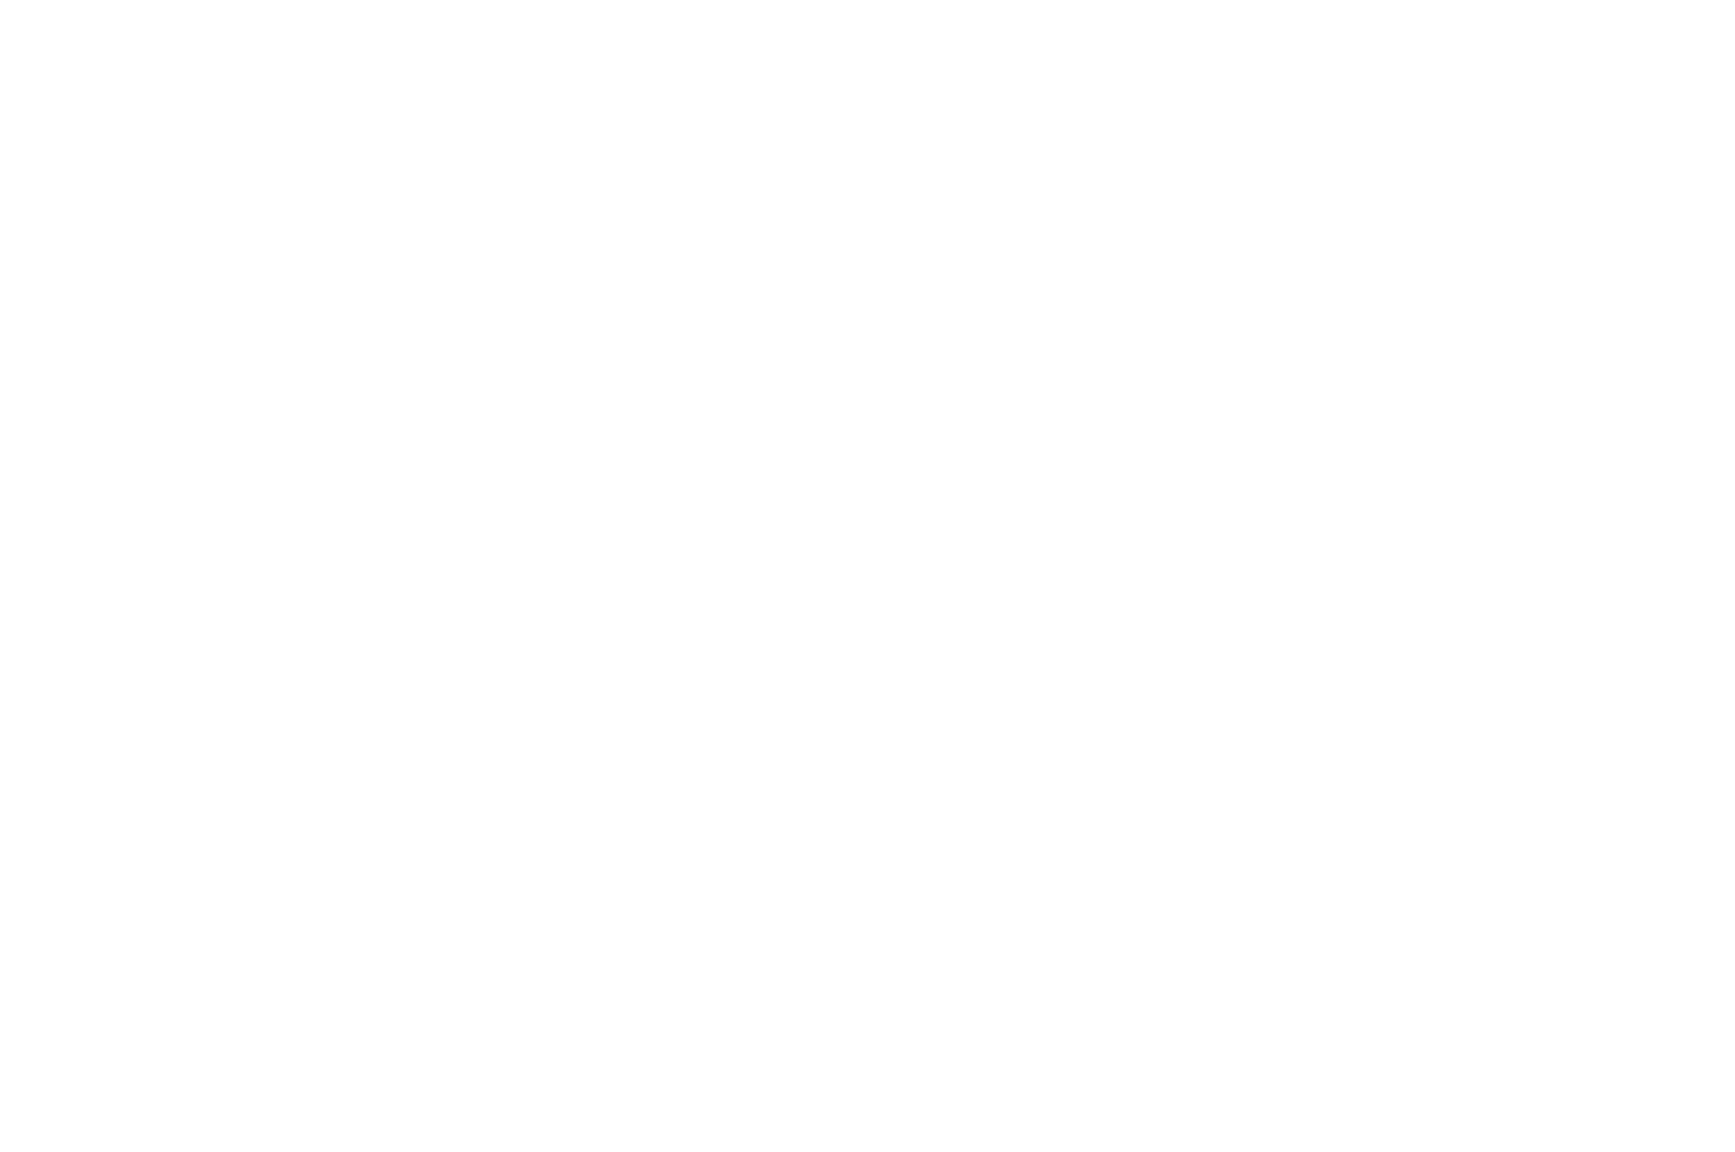 AWARD NOMINEE - The Brightside Film Festival - 2020.png